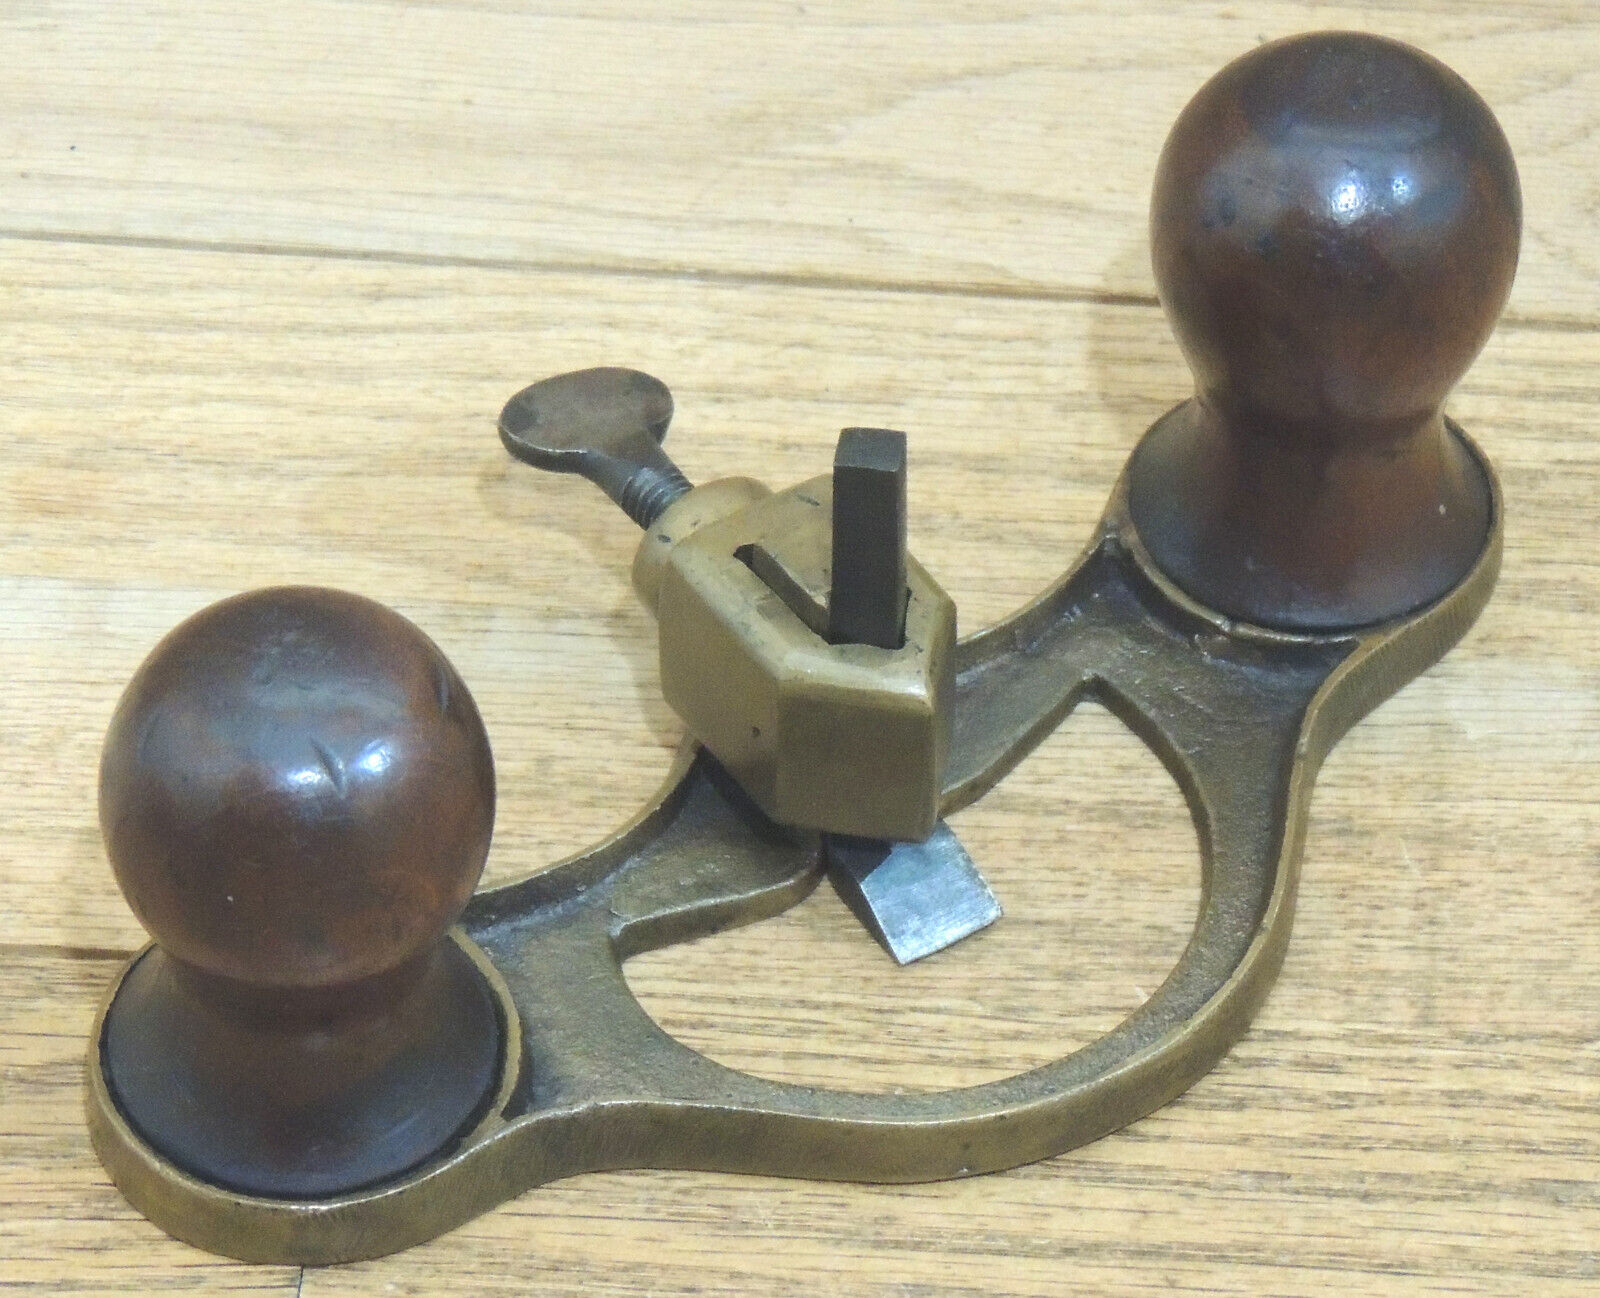 UNIQUE PATTERN MAKER MADE BRASS ROUTER PLANE-ANTIQUE HAND TOOL